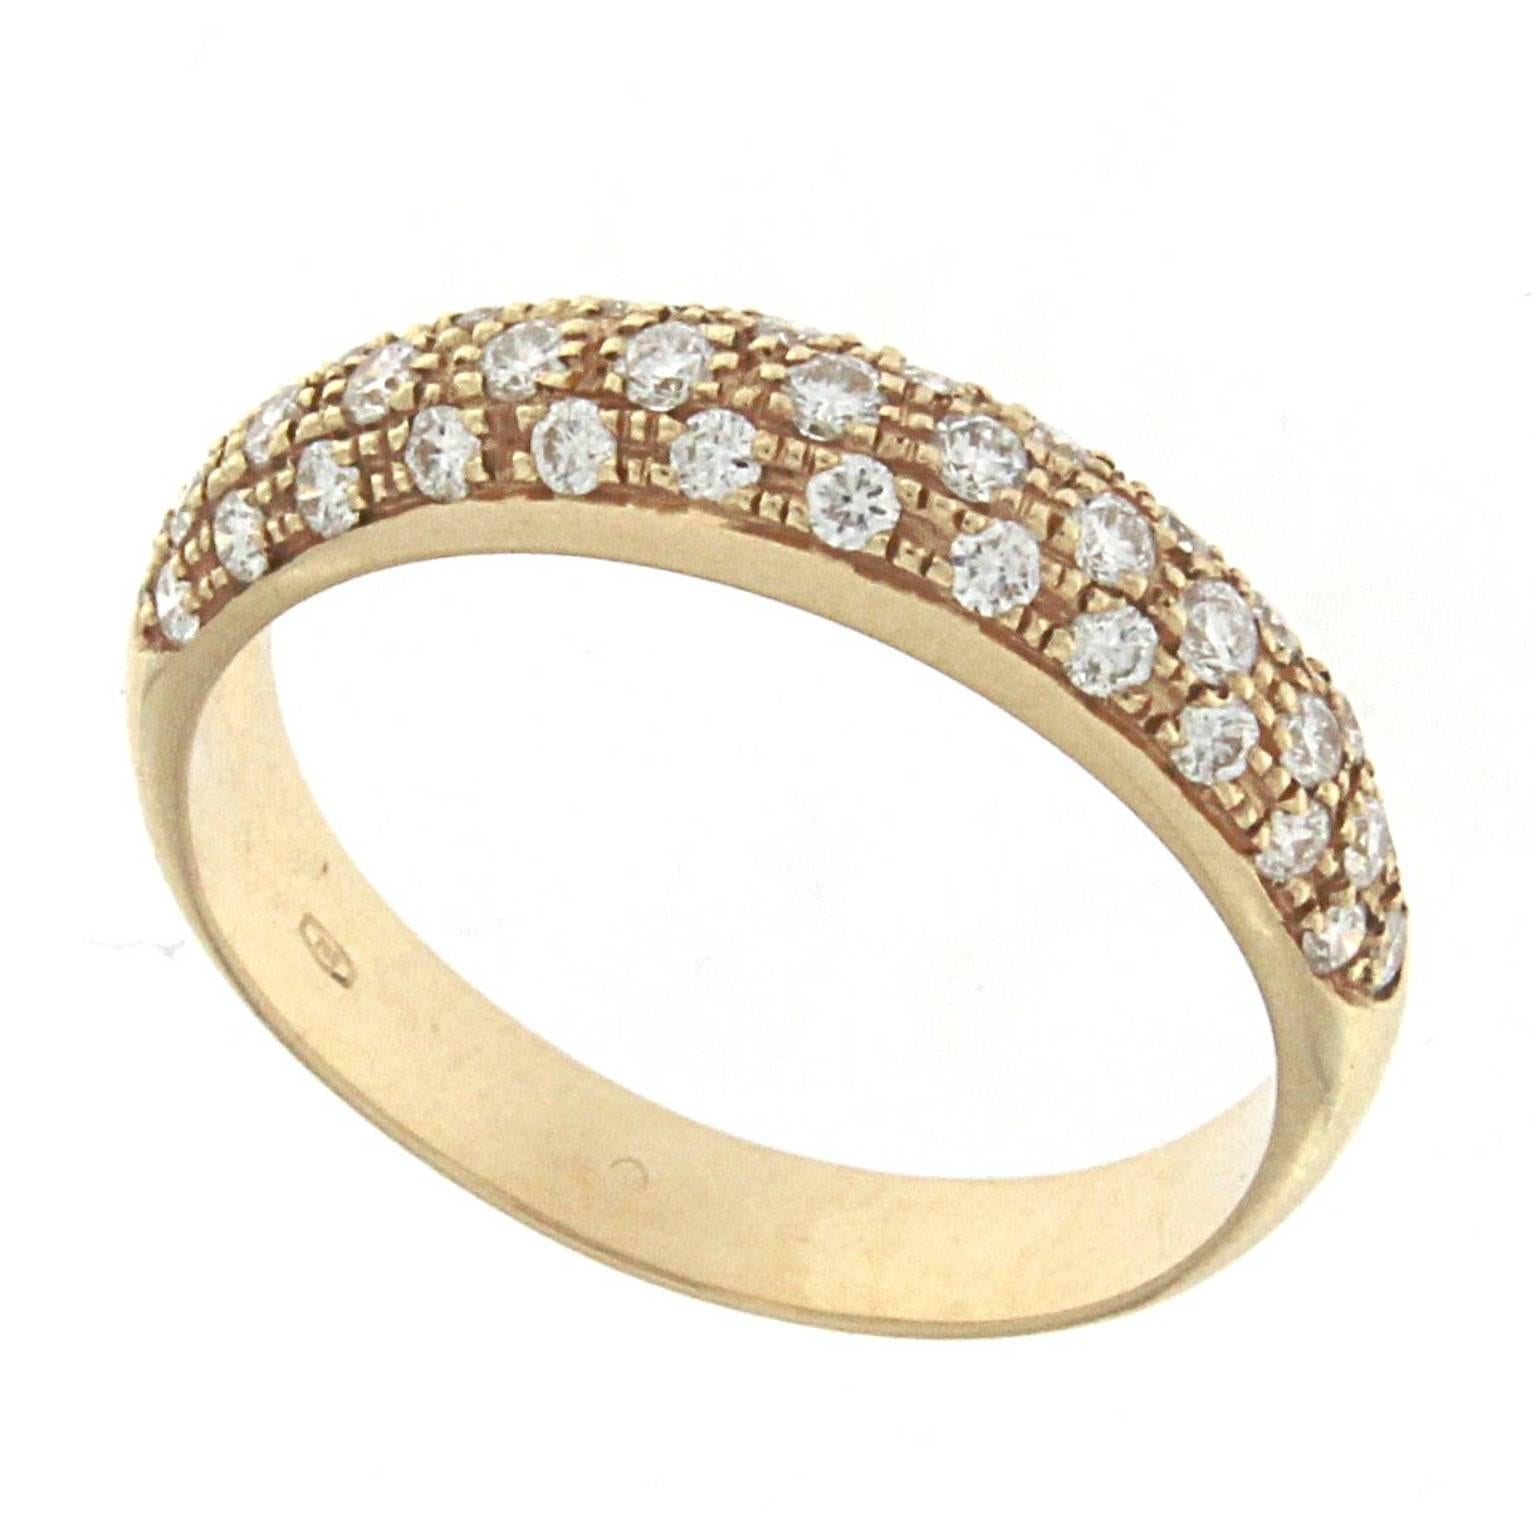 Ring from the Collection "Essence" 18 Karat Pink Gold and Diamonds